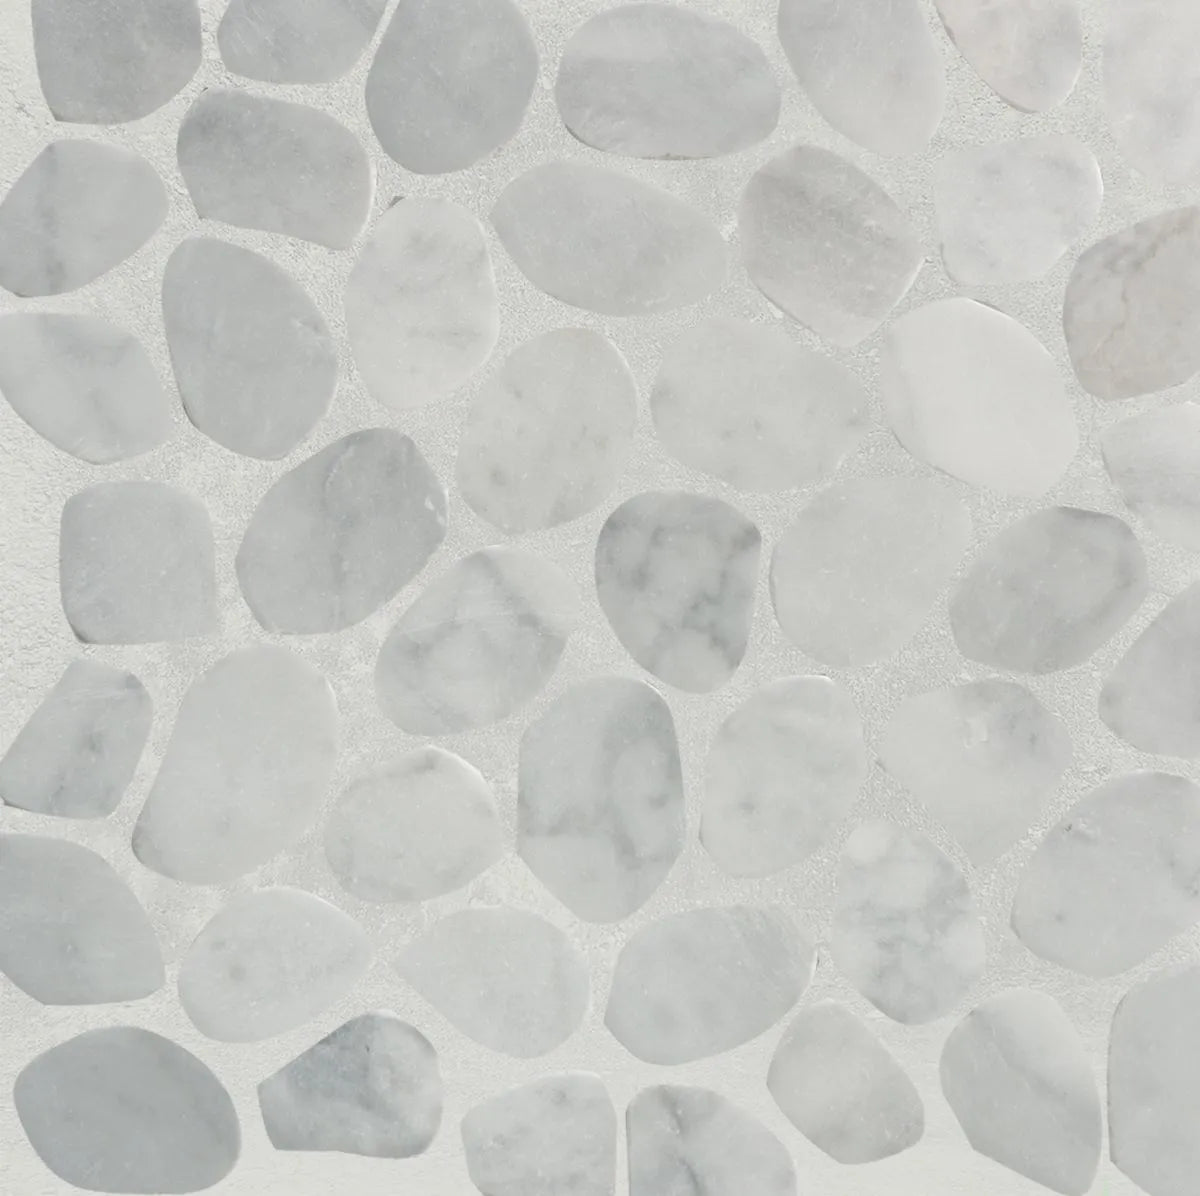 slice carrara tile sample with grout